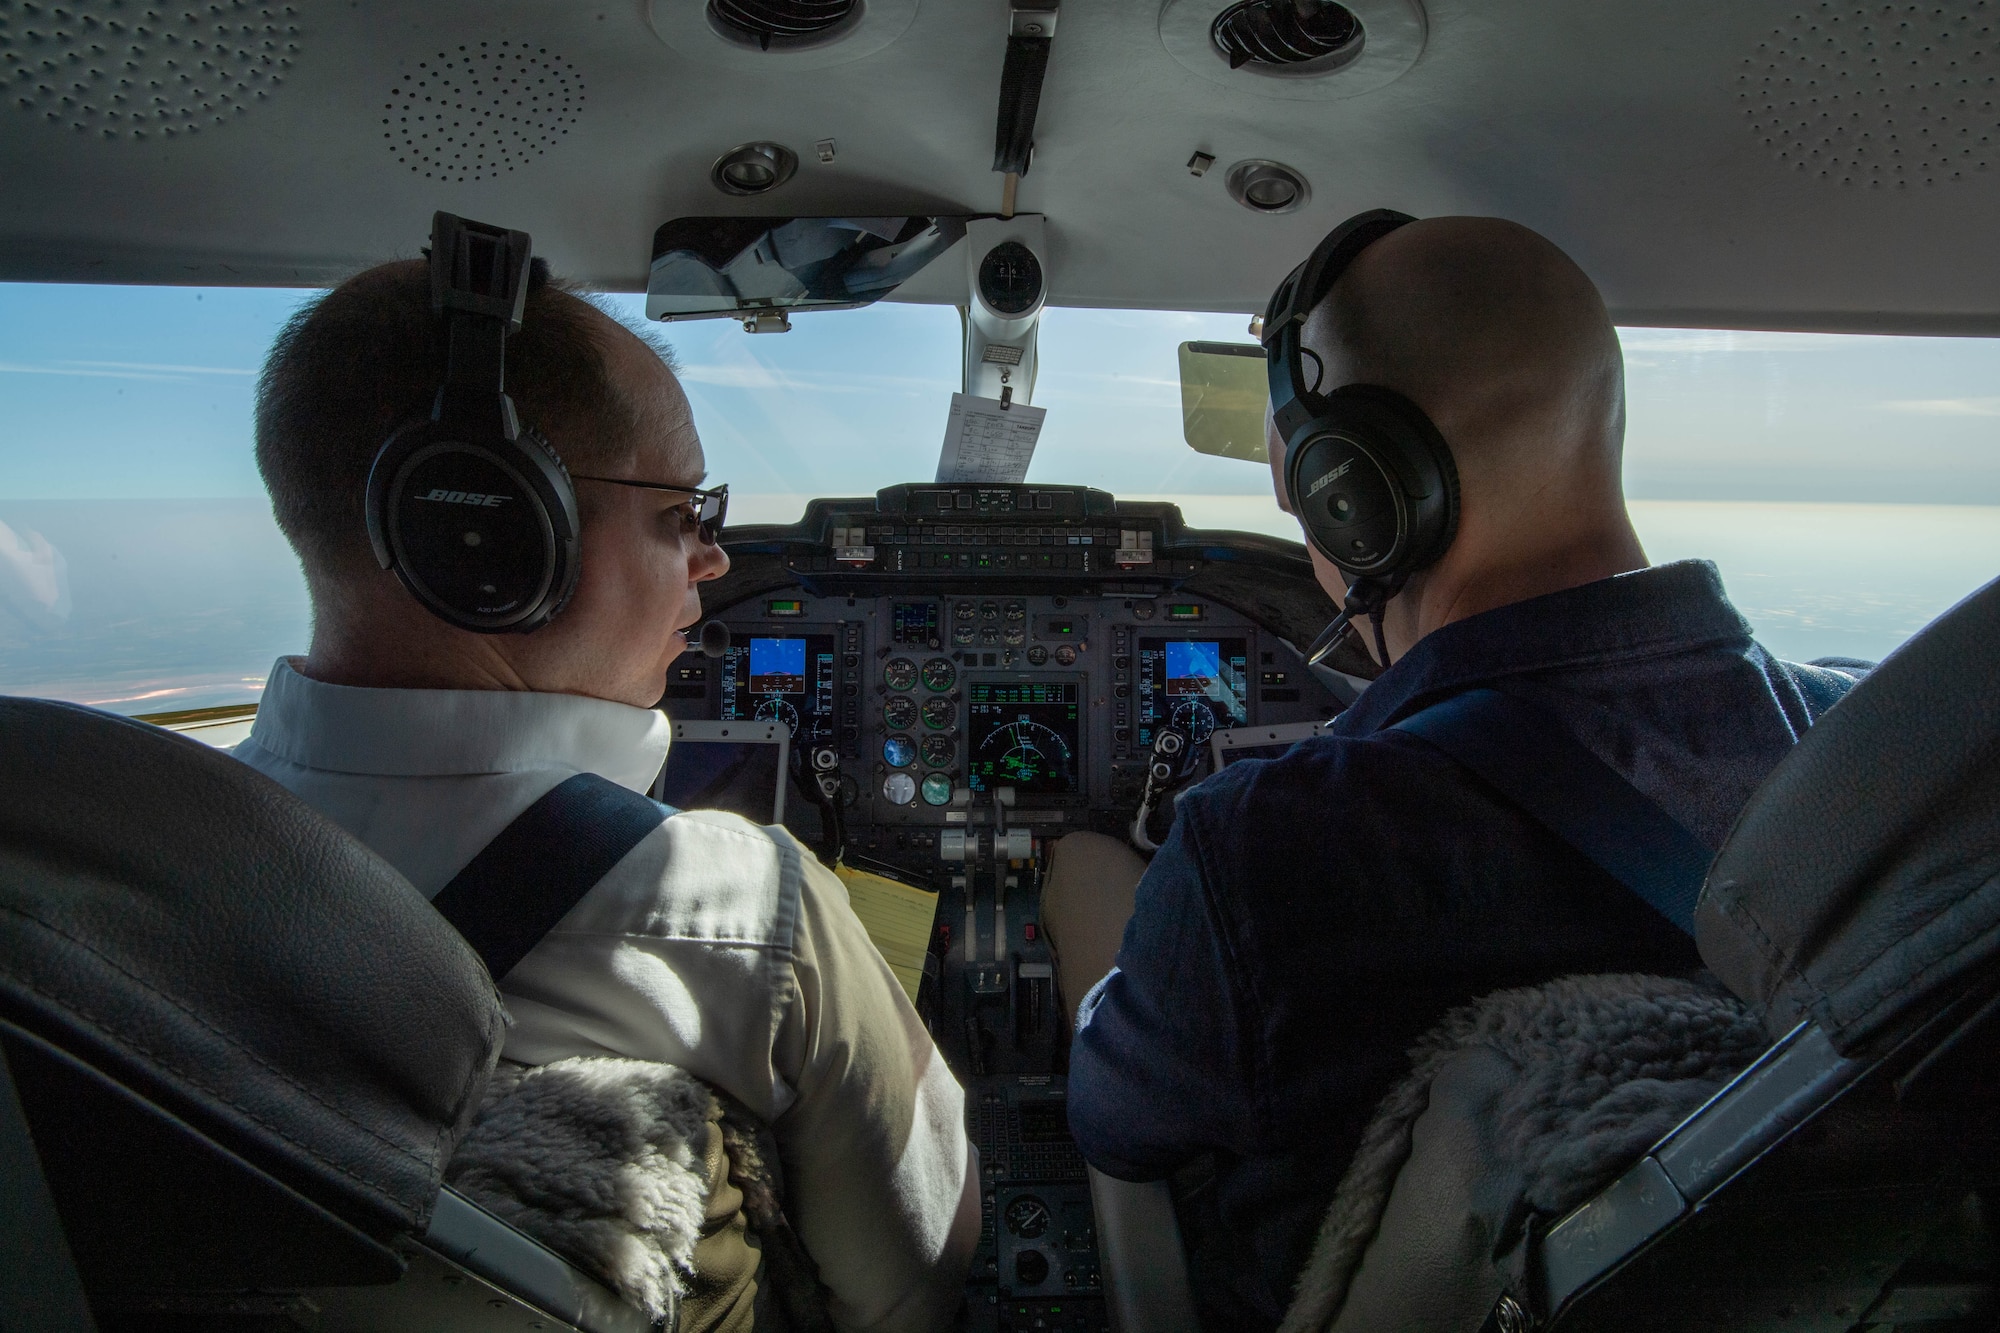 Maj. Kirk Schlueter, 76th Airlift Squadron aircraft commander, left, and Maj. Tyler Neidecker, 76th AS co-pilot, fly a C-21 Learjet from Ramstein Air Base, Germany, to Vilnius International Airport, Lithuania, April 6, 2023.